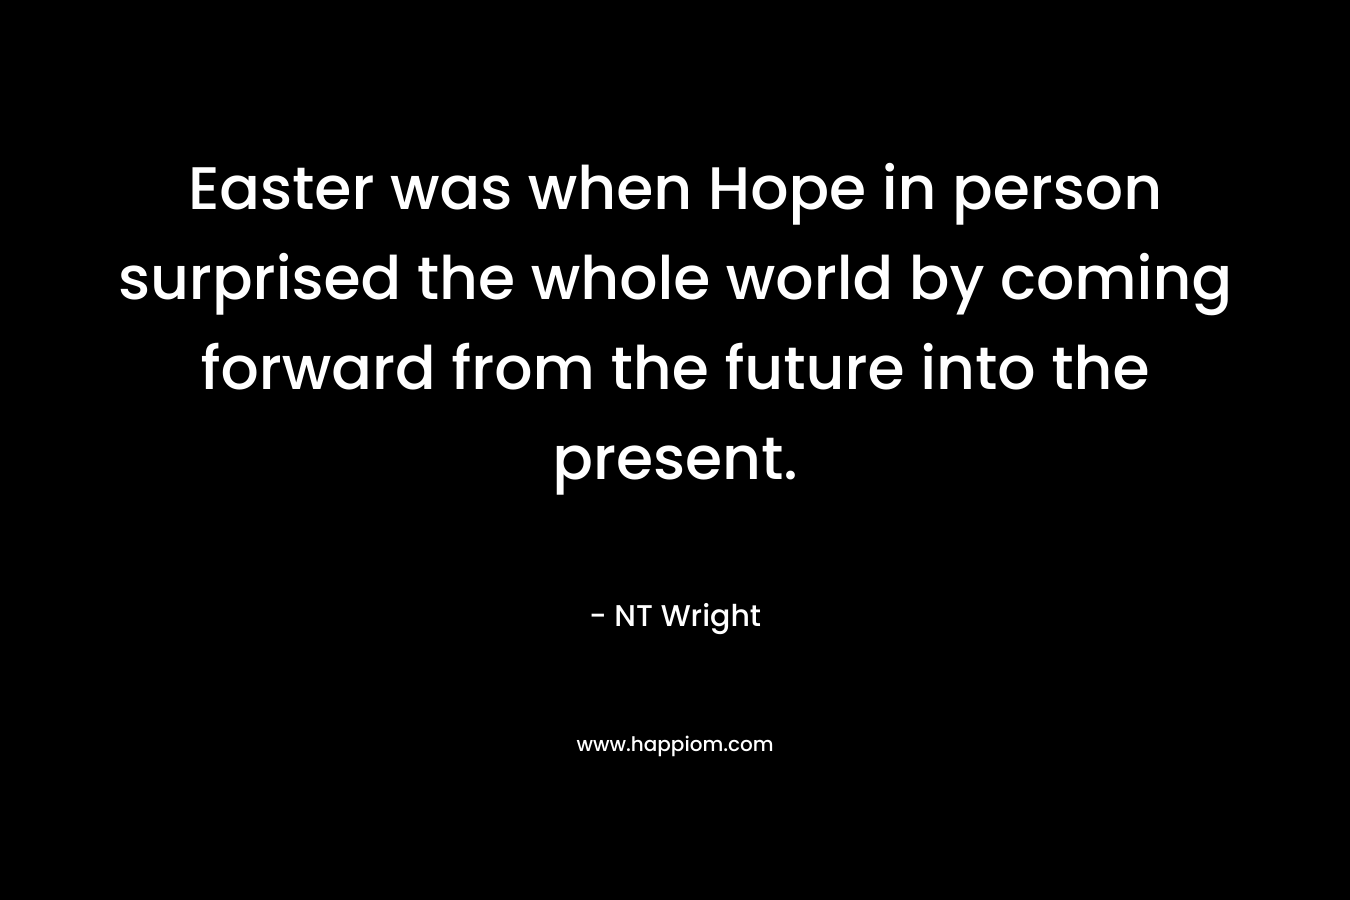 Easter was when Hope in person surprised the whole world by coming forward from the future into the present. – NT Wright